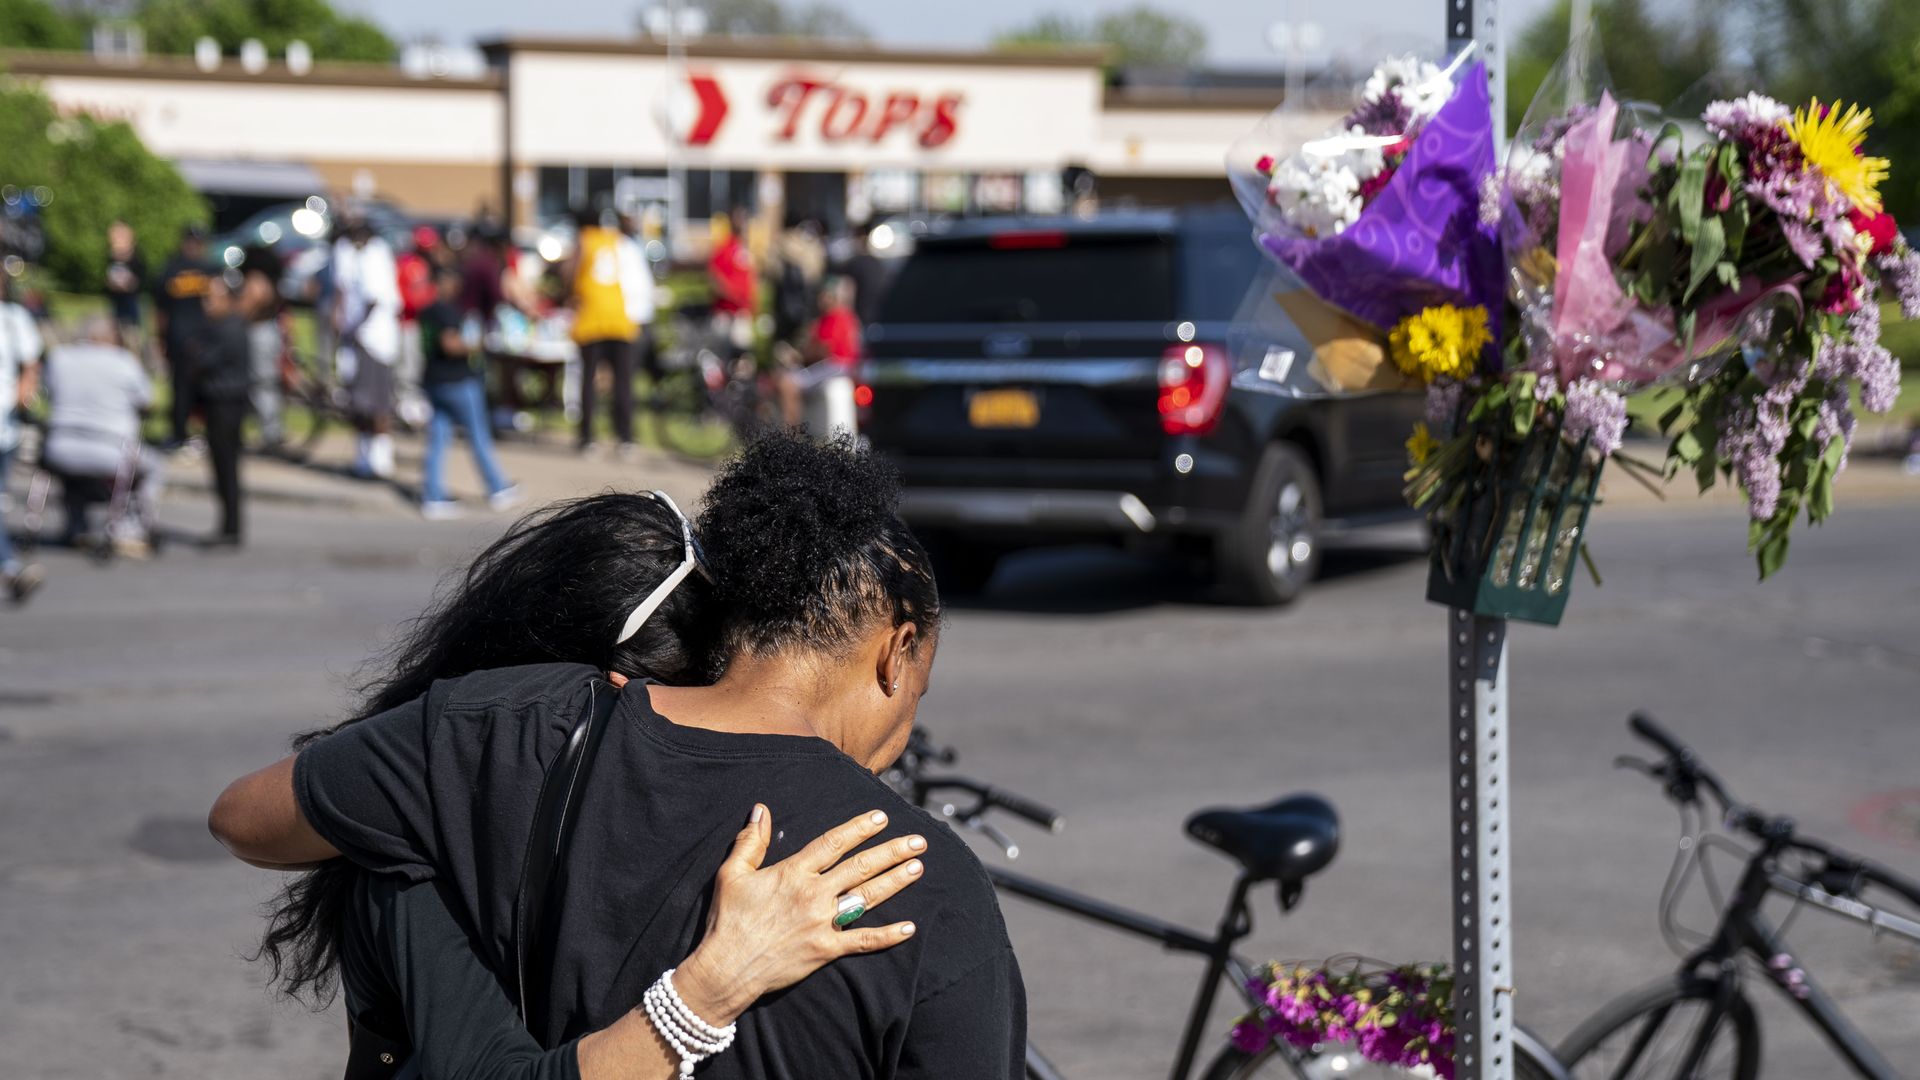 Photo of two people embracing in front of the Tops grocery store where police cars gathered in response to a shooting